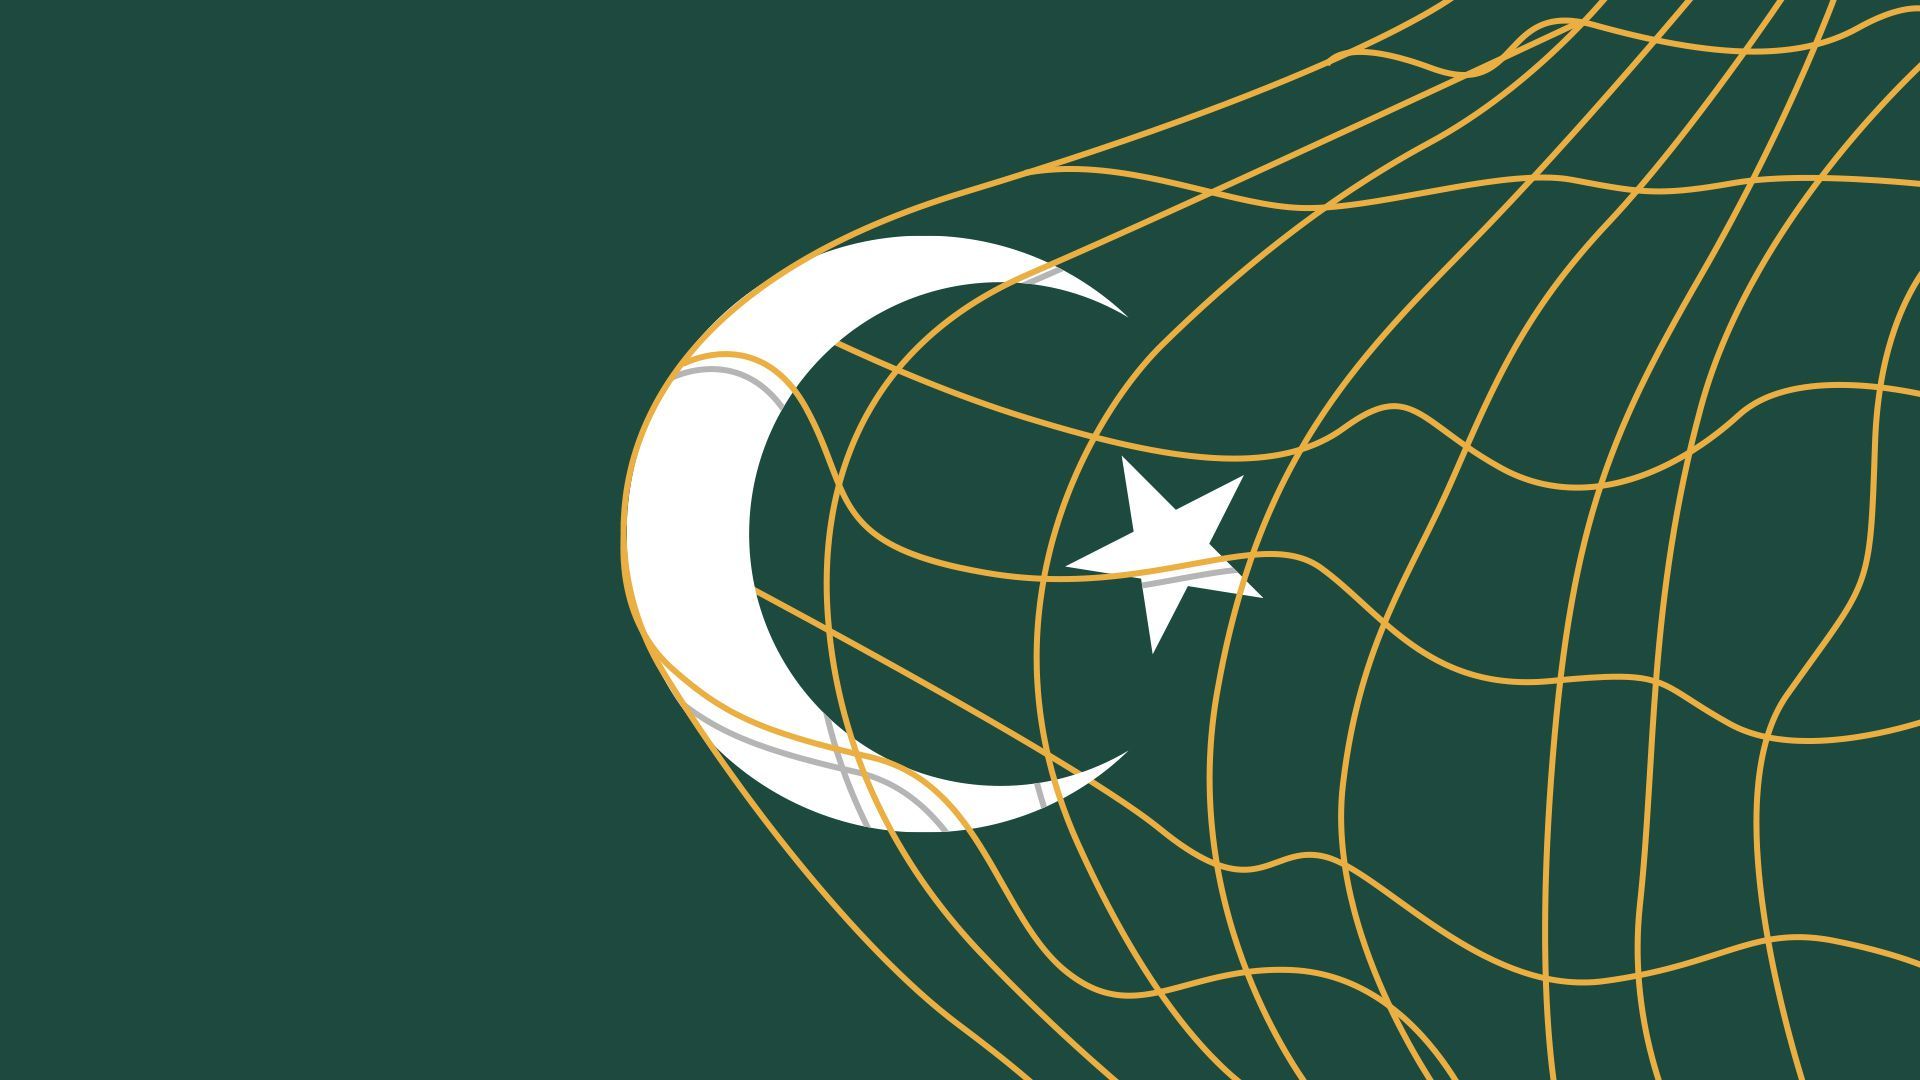 Illustration of an Islamic crescent and star being caught in a soccer goal net. 